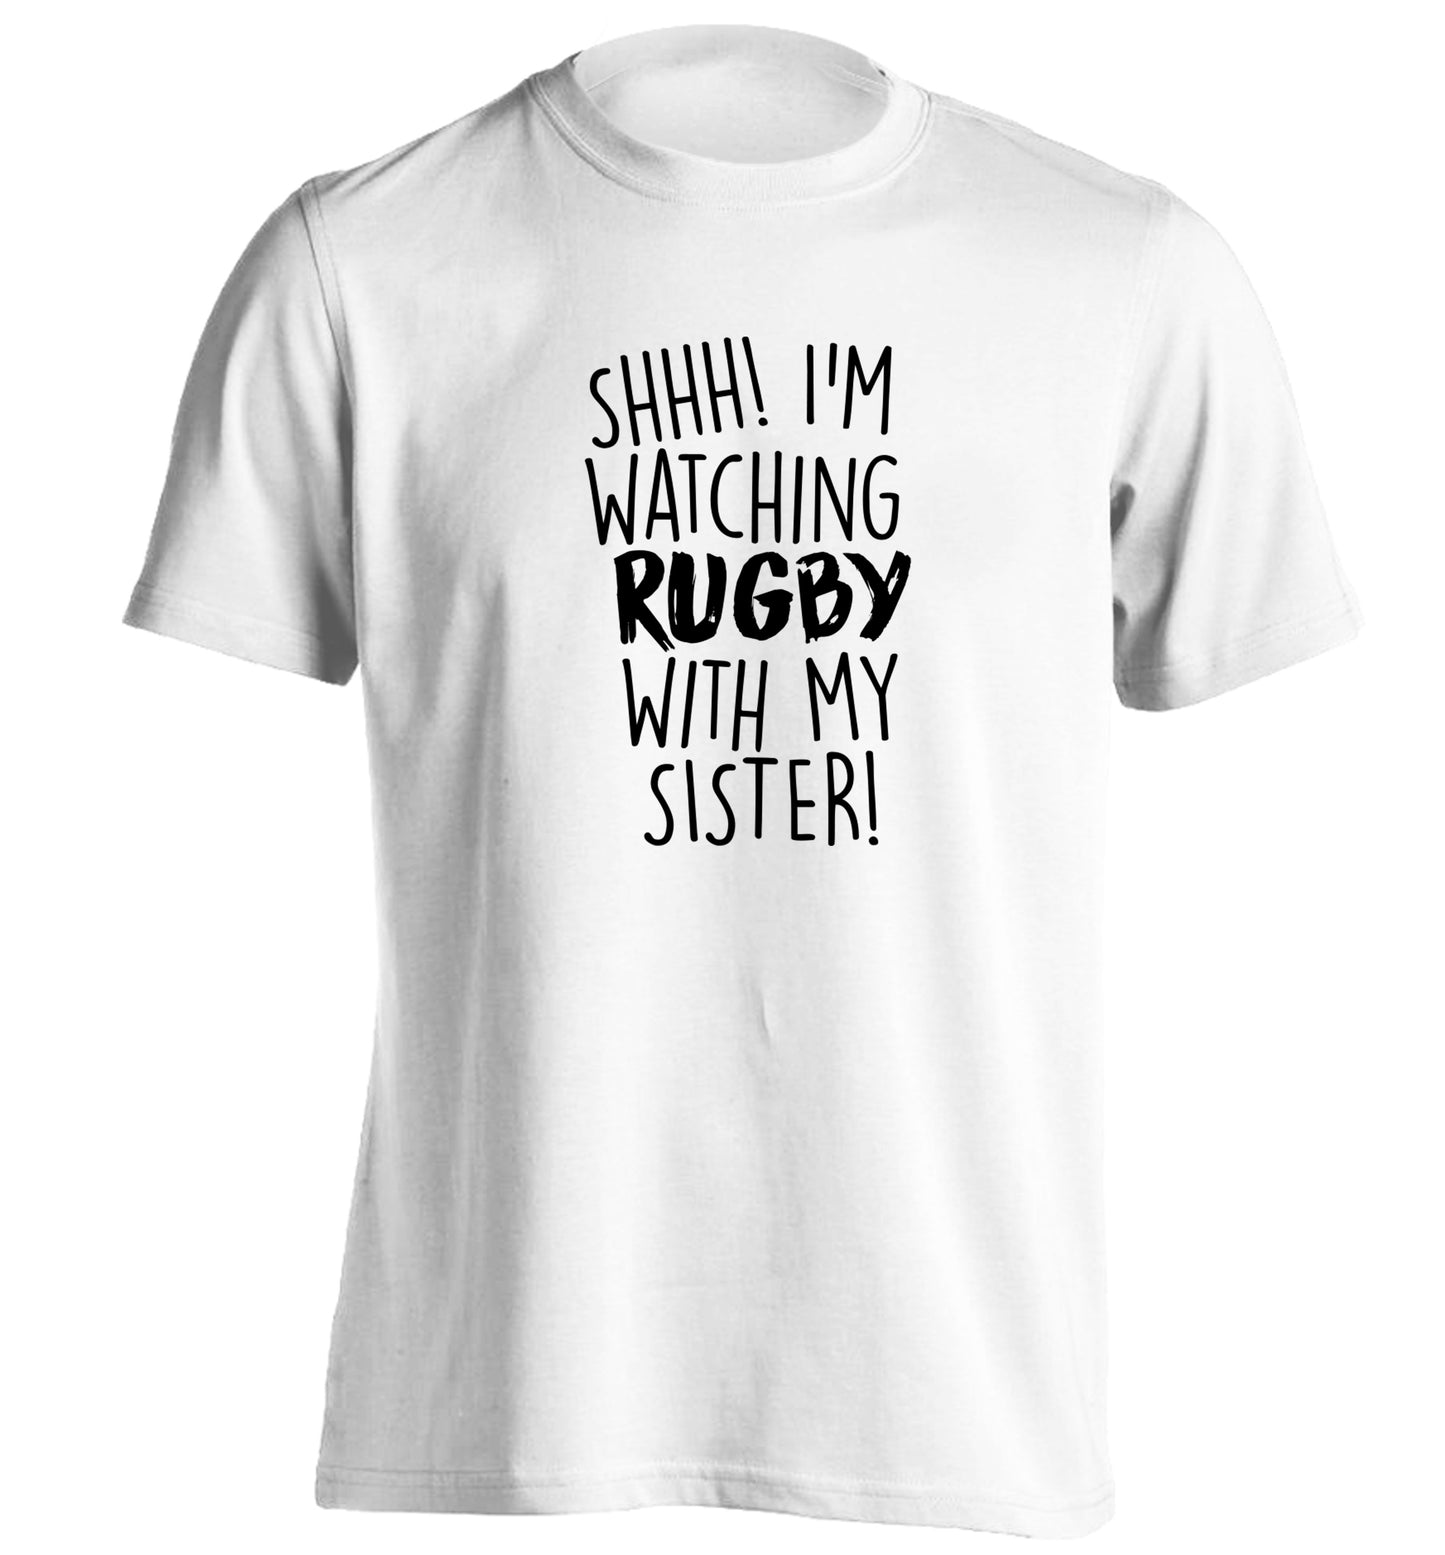 Shh... I'm watching rugby with my sister adults unisex white Tshirt 2XL